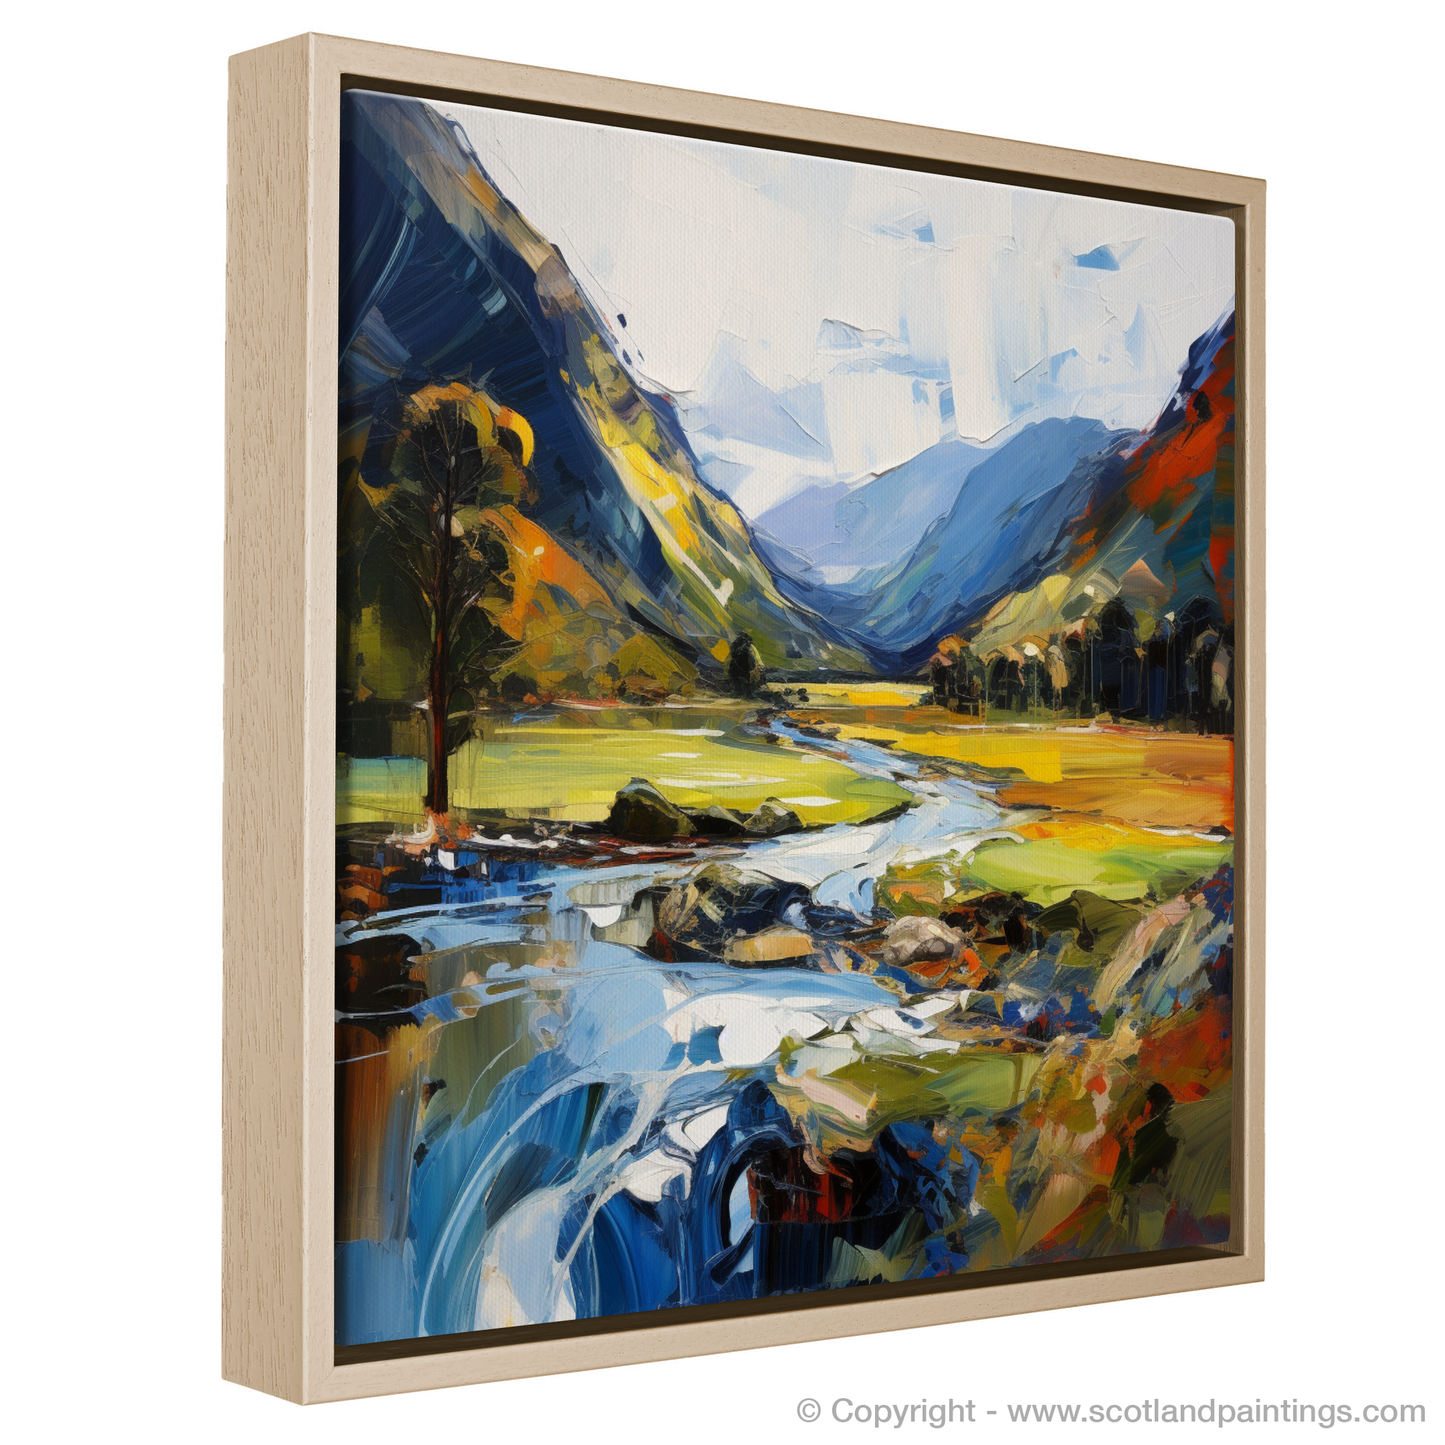 Painting and Art Print of Glen Lyon, Perthshire entitled "Glen Lyon Unleashed: An Expressionist Journey Through the Scottish Wilderness".